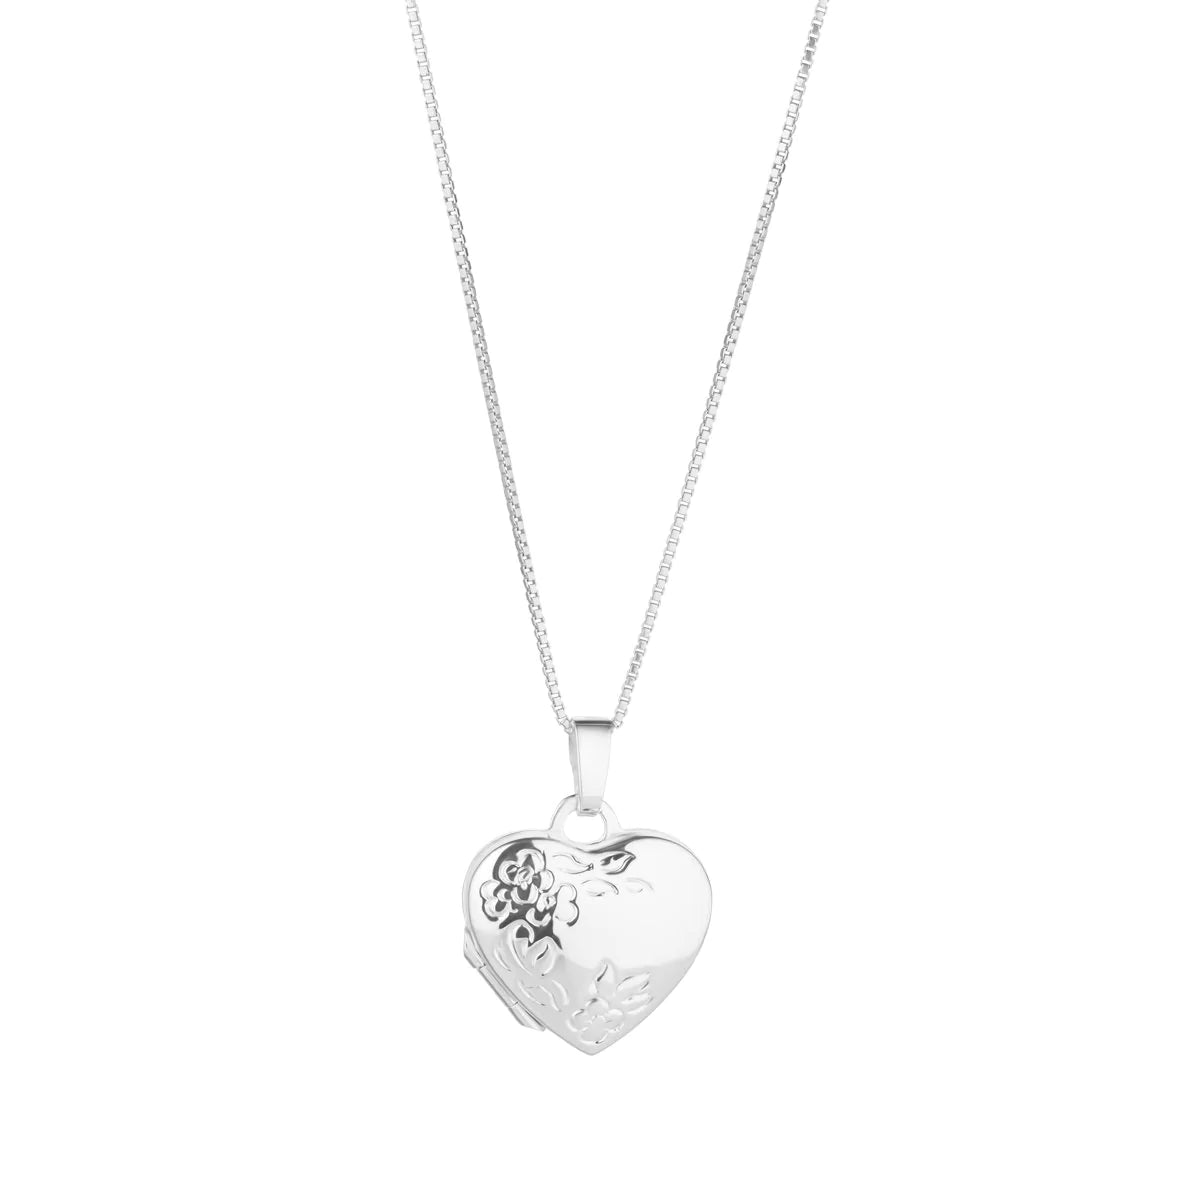 Sterling Silver Heart Shaped & Engraved Locket Necklace